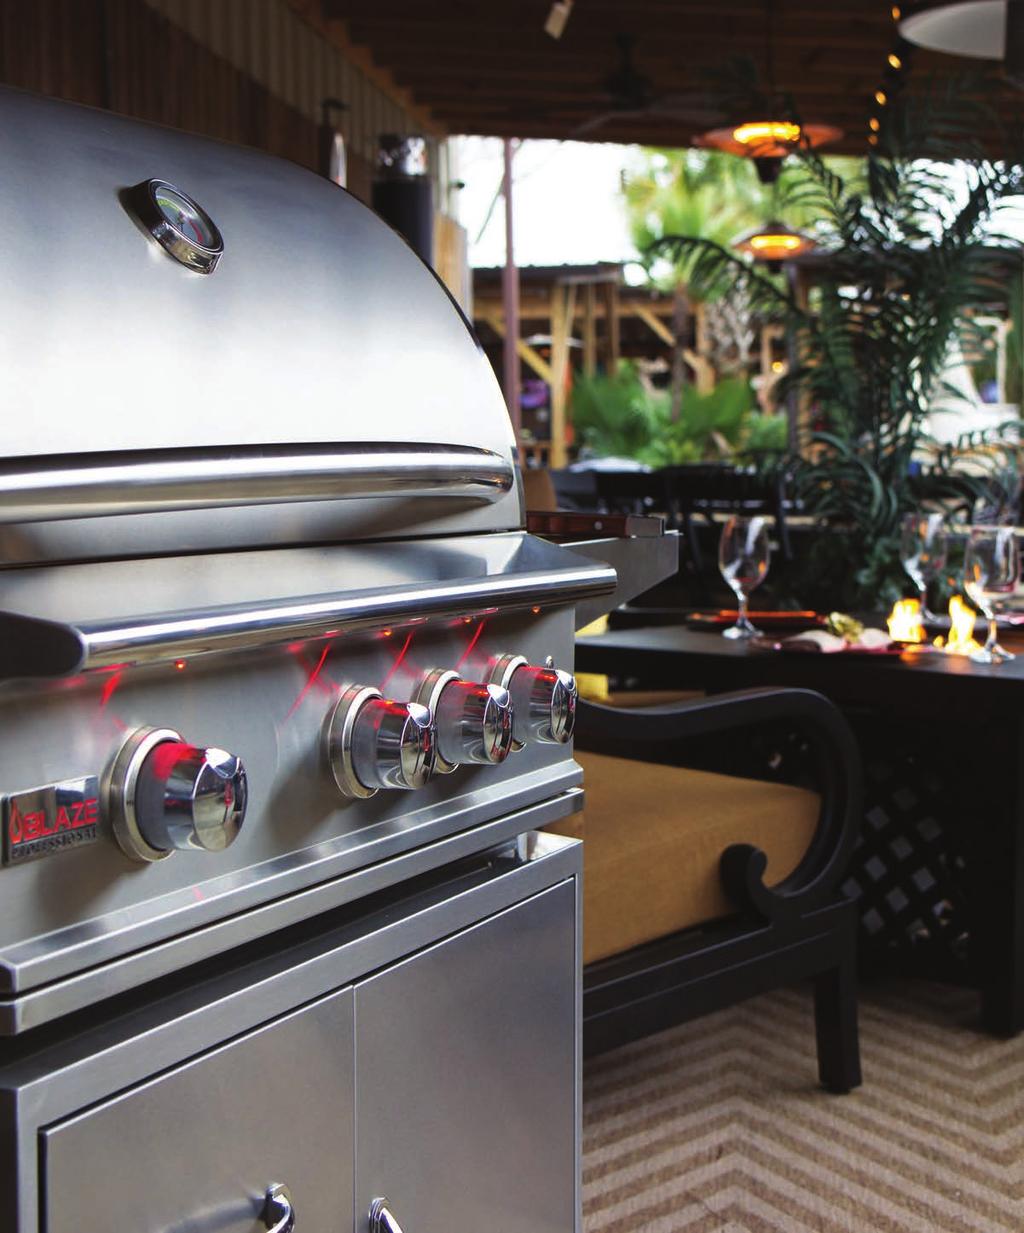 Professional Grills Blaze 3-Burner Professional Gas Grill Blaze presents the Blaze Professional Grill as a leader in the industry.